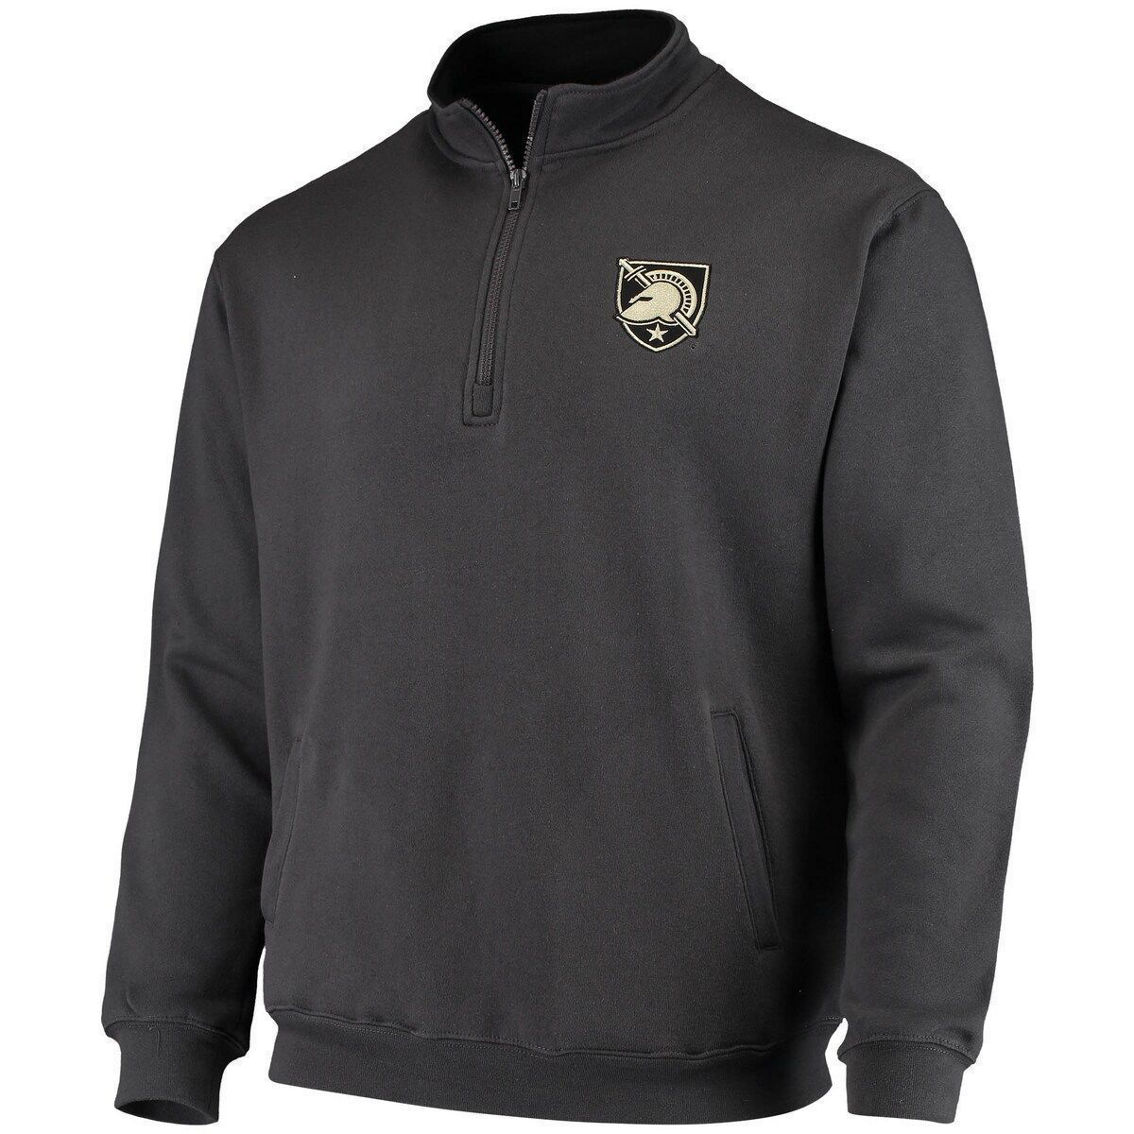 Colosseum Men's Charcoal Army Black Knights Tortugas Logo Quarter-Zip Jacket - Image 3 of 4